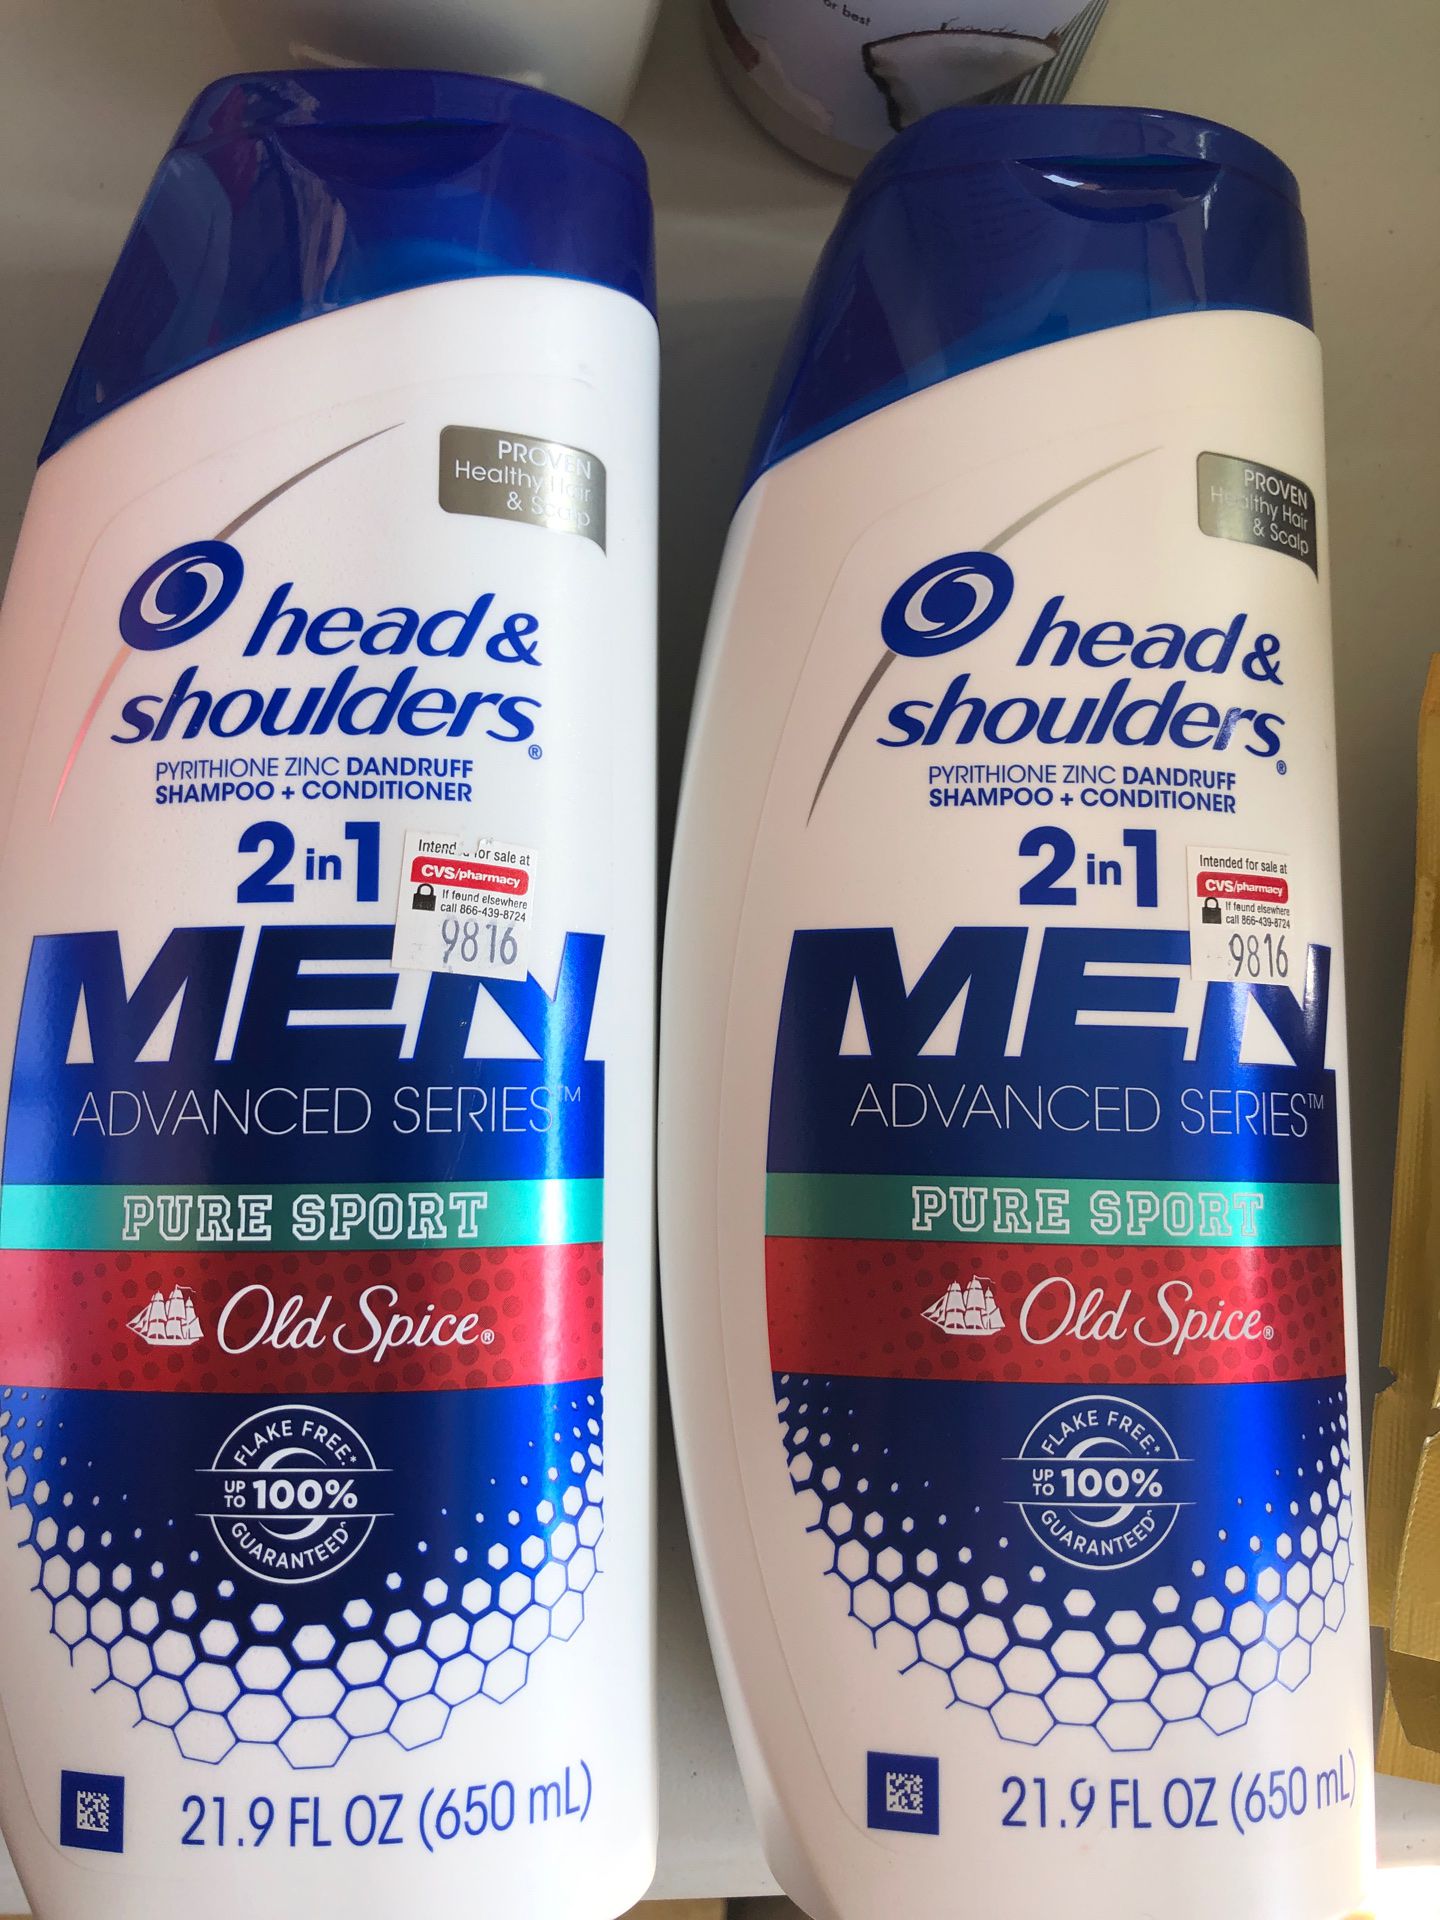 Head and shoulders with old spice